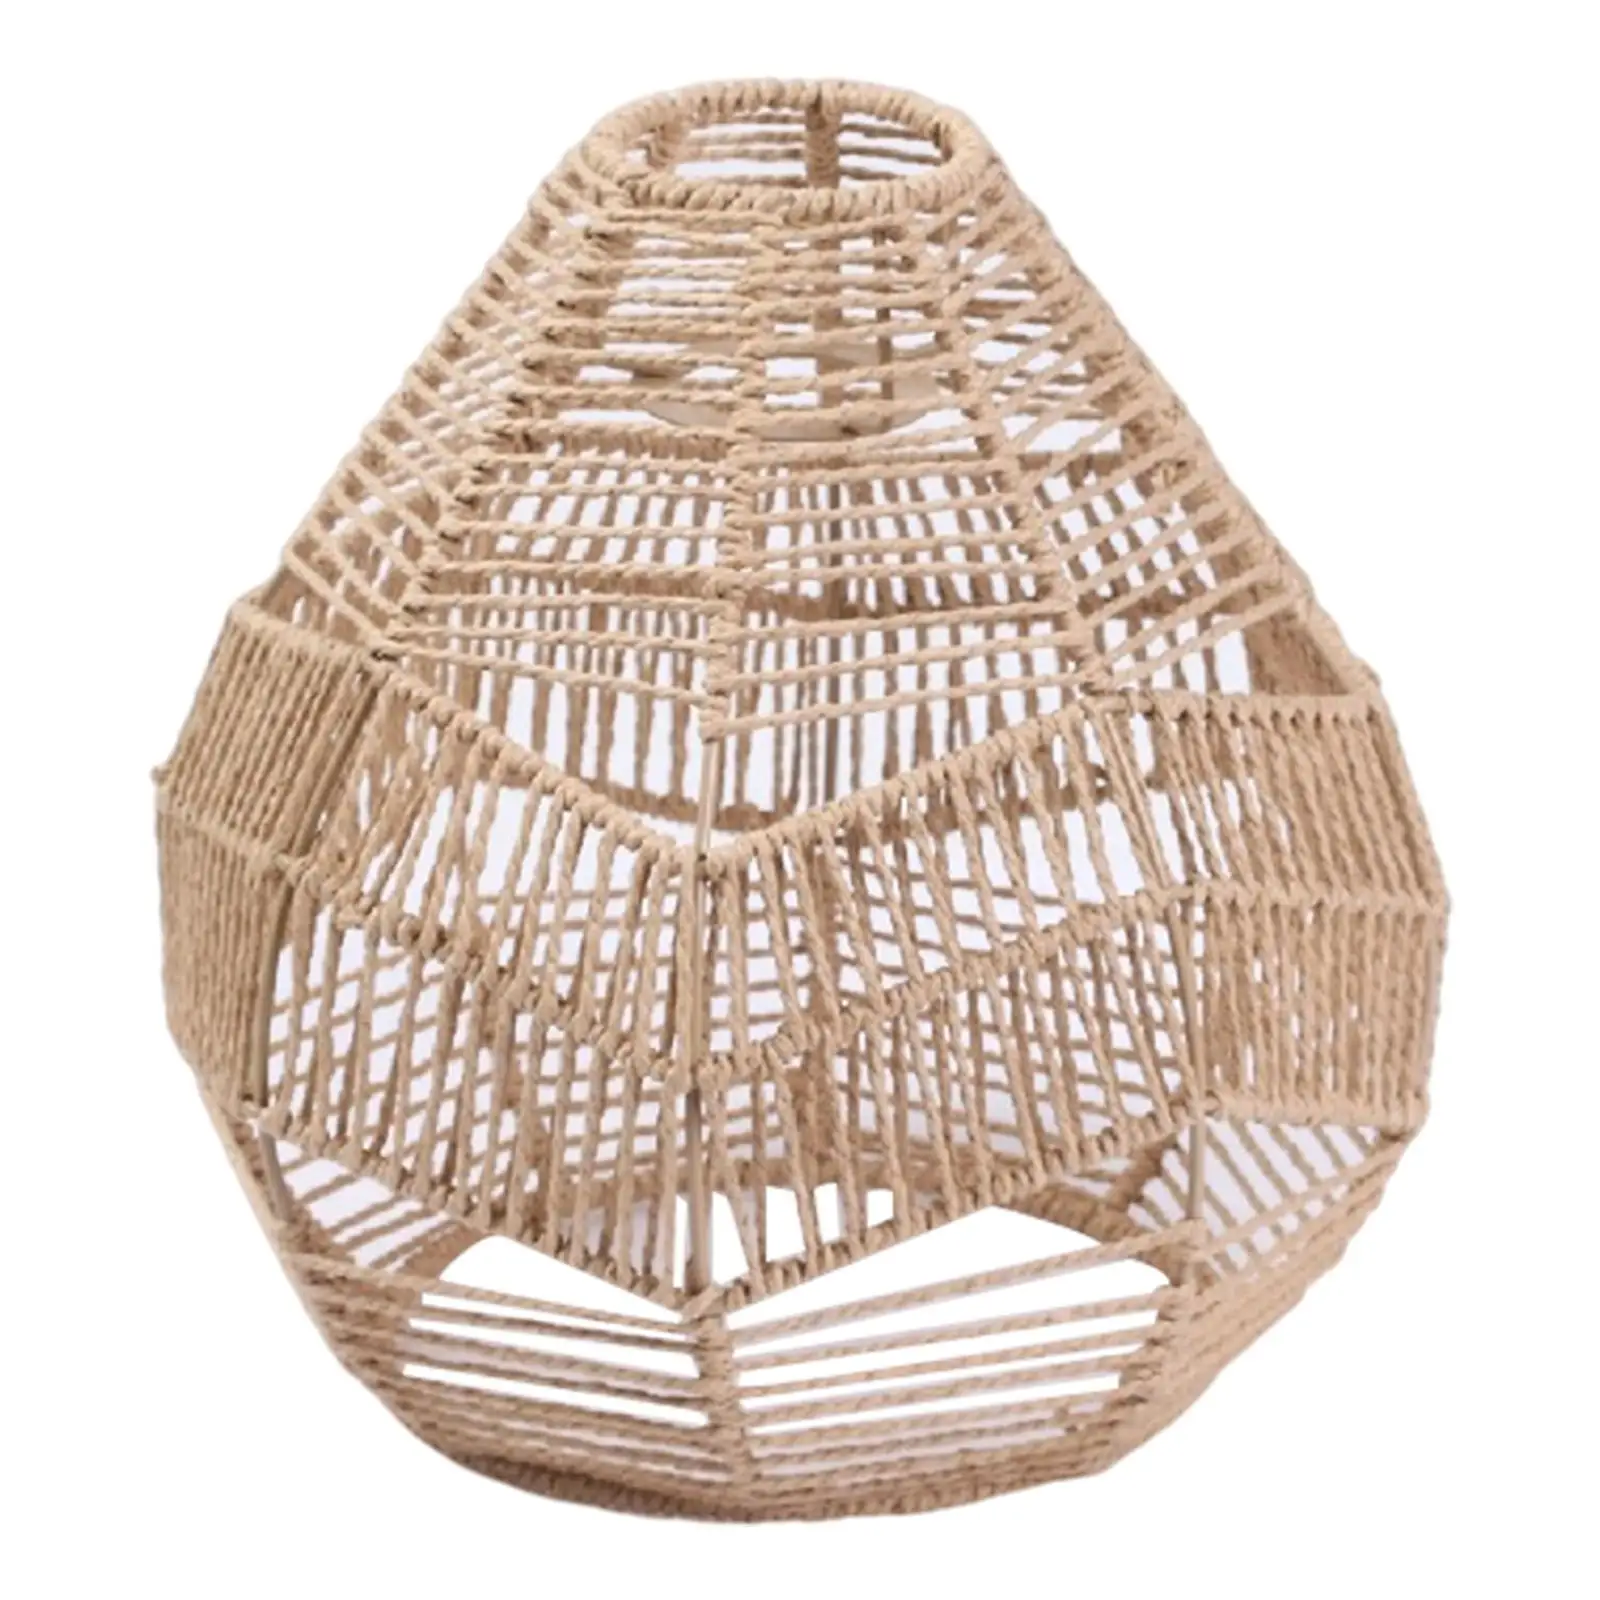 

Handwoven Lamp Shade Hanging Light Fixture Cover Ceiling Light Shade Lampshade for Hotel Restaurant Dining Room Cafe Decor